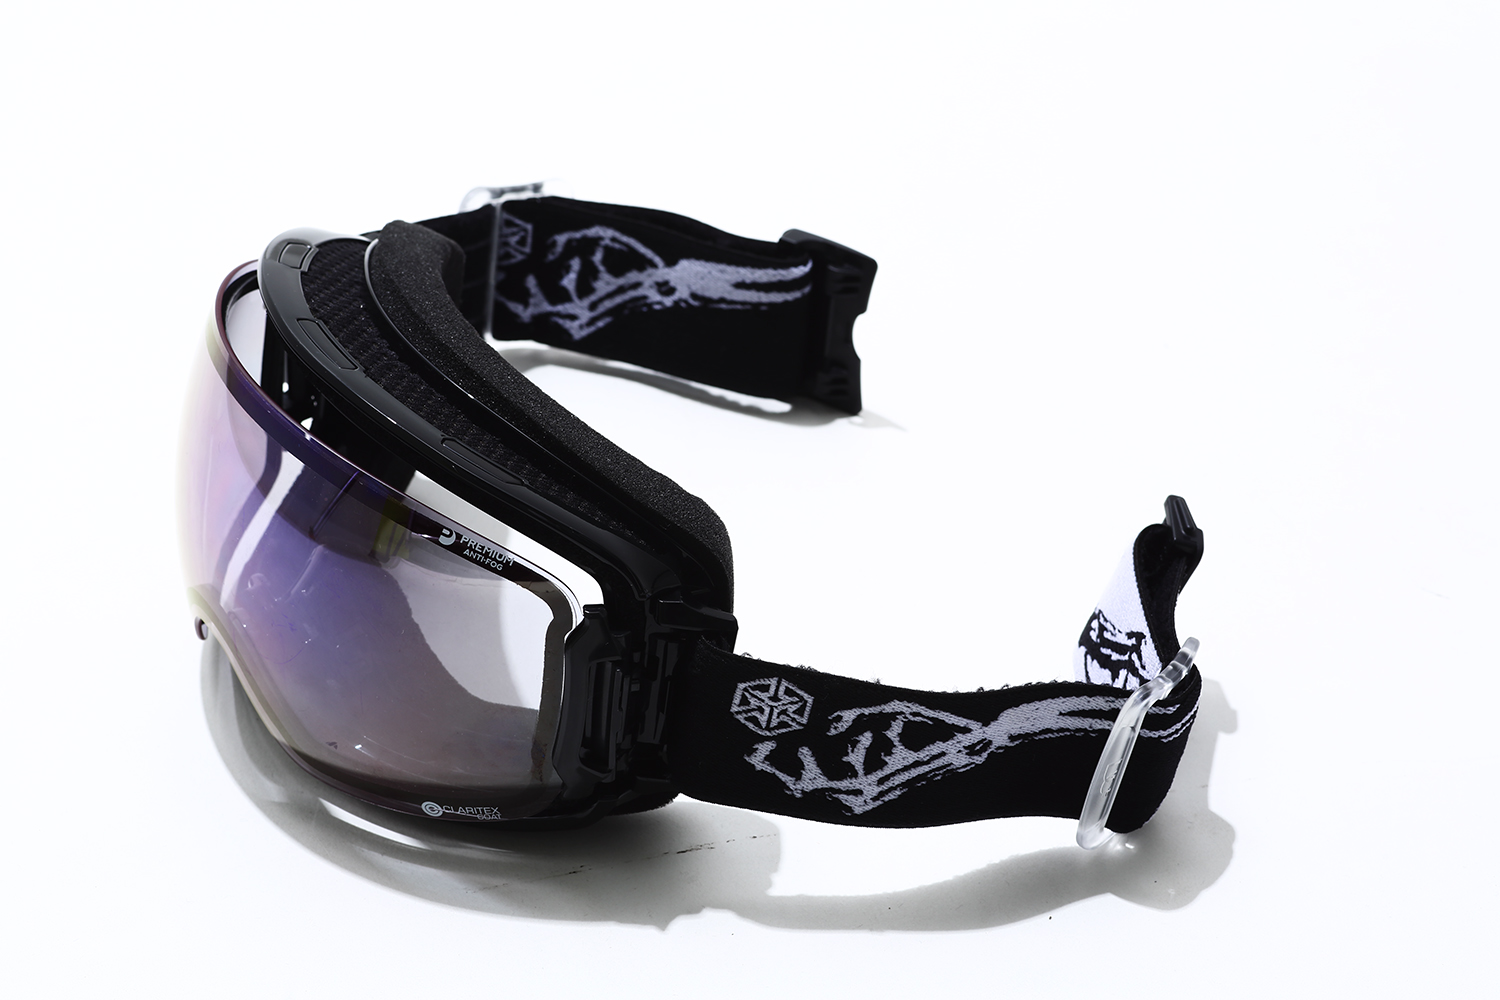 "A BLOW SYSTEM" where the lens pops up to the front by raising the left and right side parts.By creating a gap between the lens and the frame, ventilation inside the goggles can be done quickly and cloudiness can be eliminated at once.Keep the environment inside the goggles in the best condition and keep a clear view